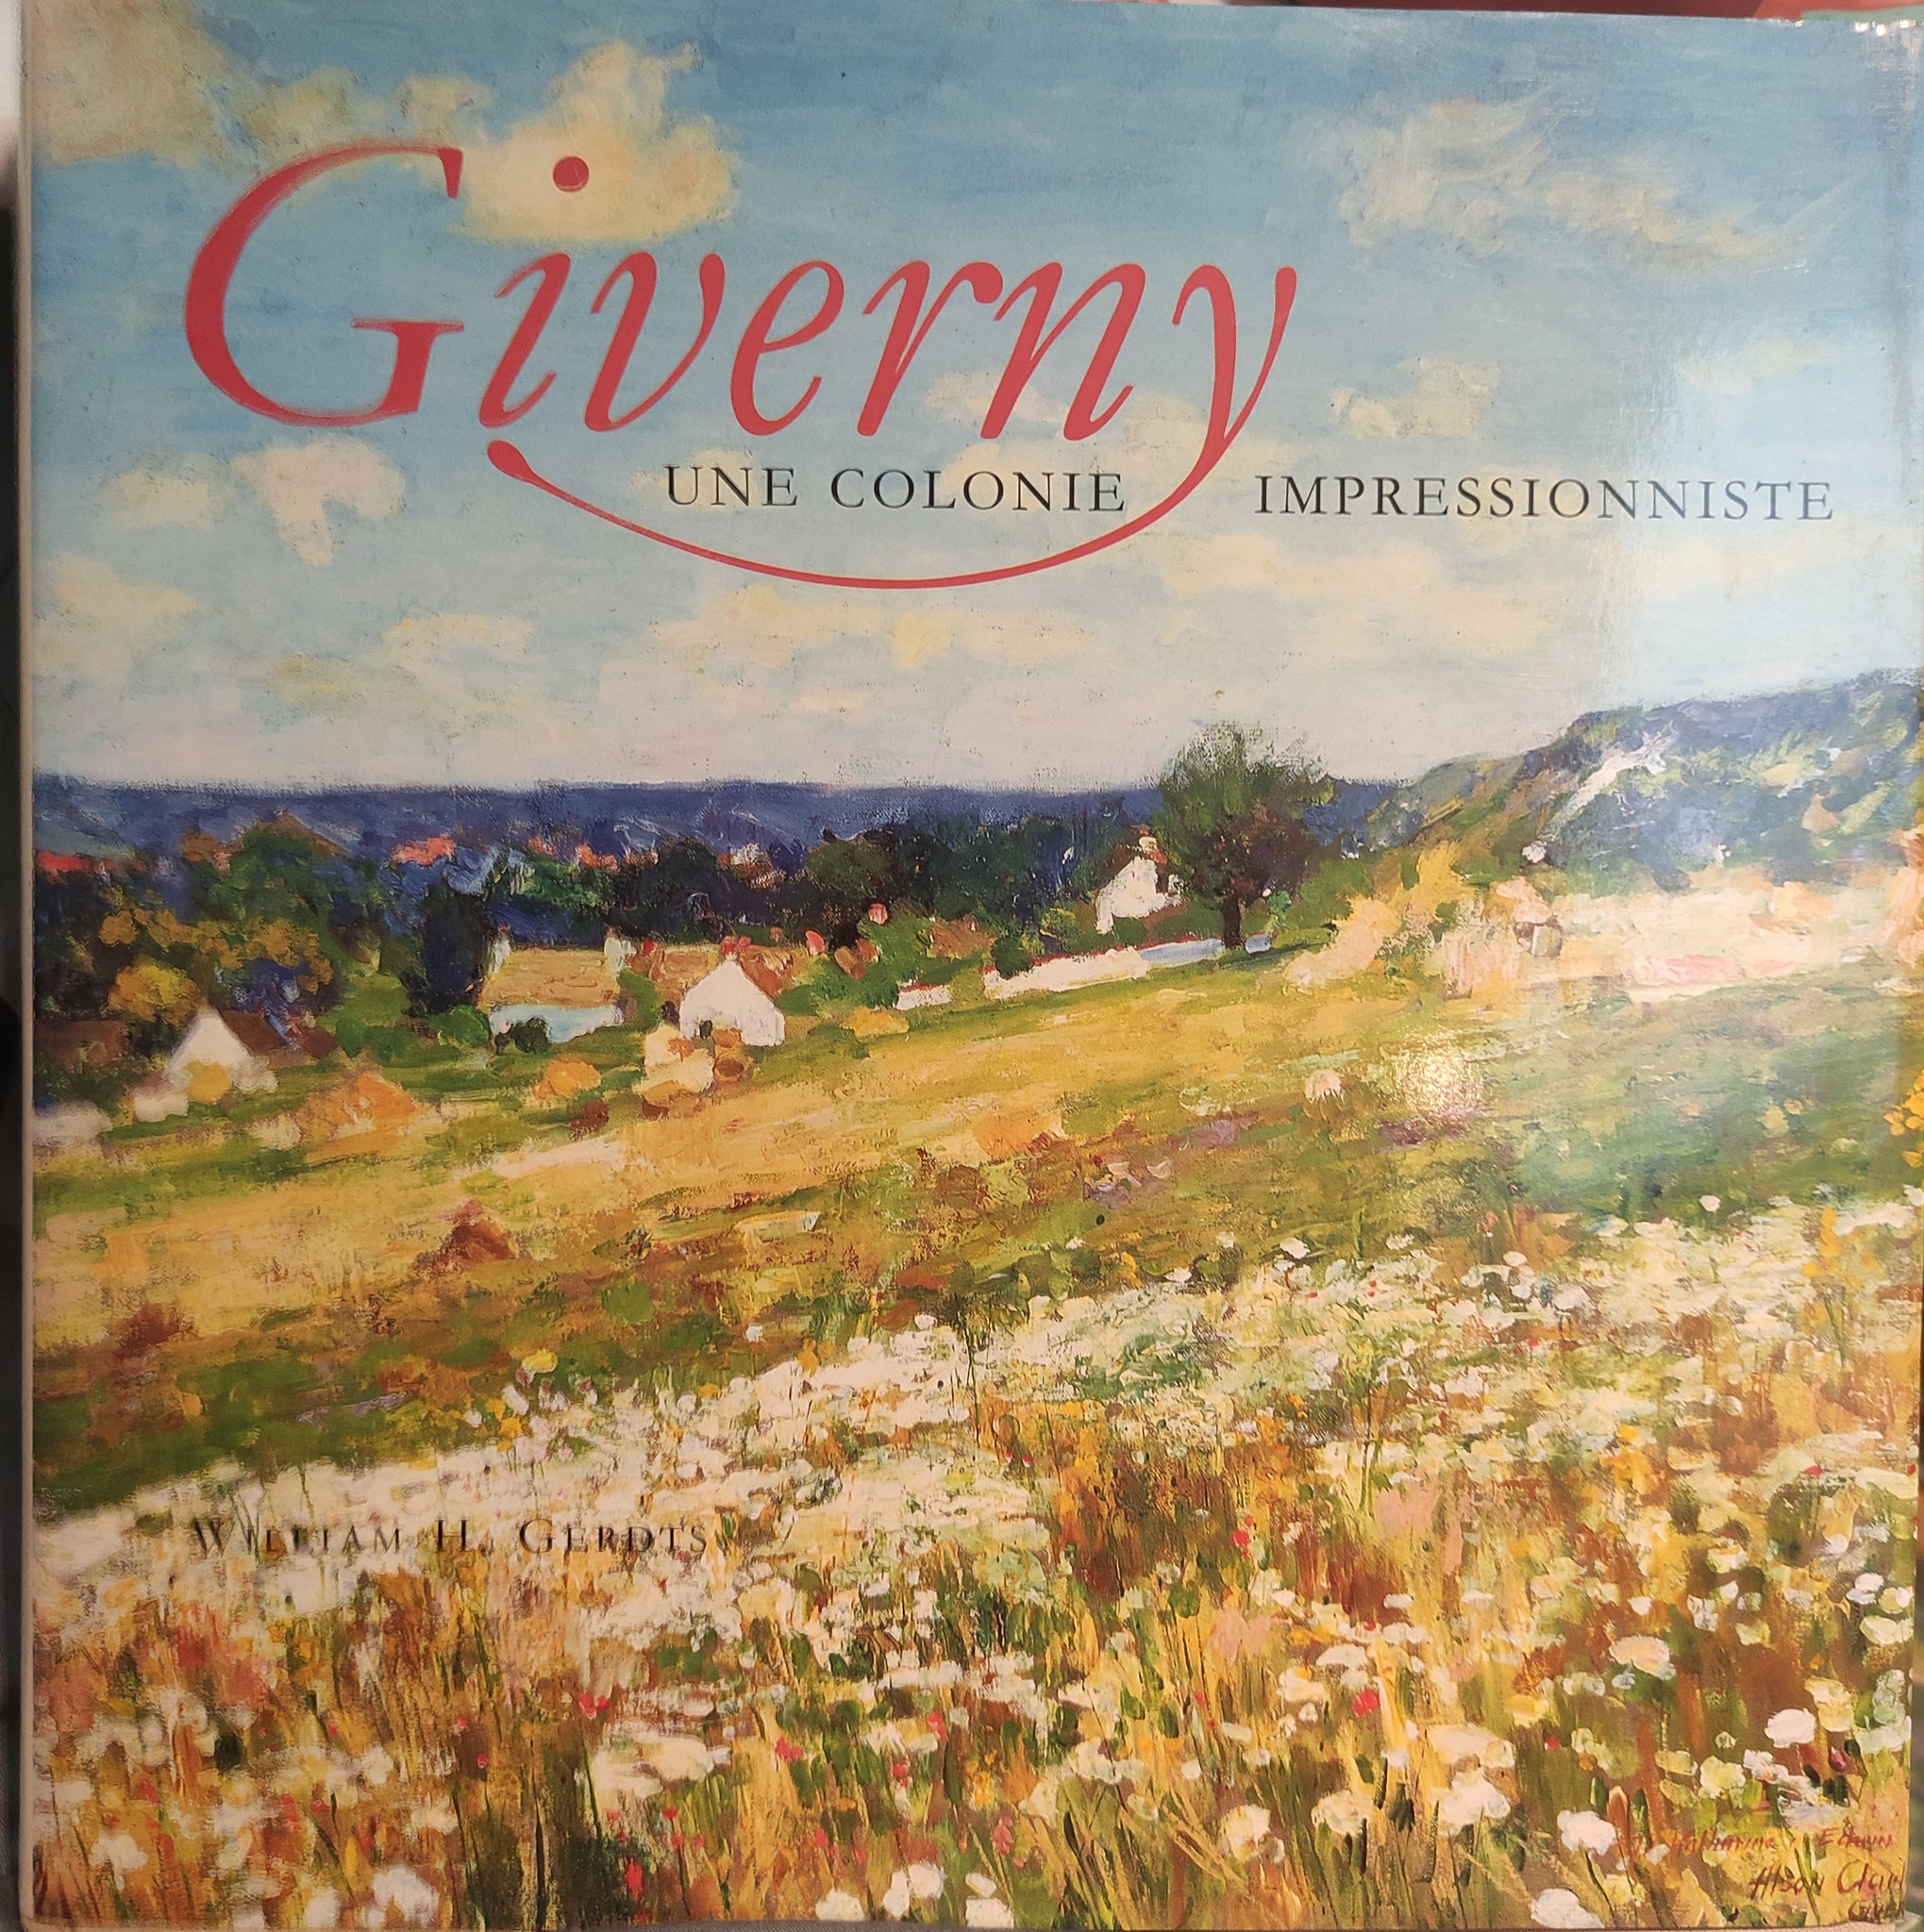 Giverny : Une colonie impressionniste.